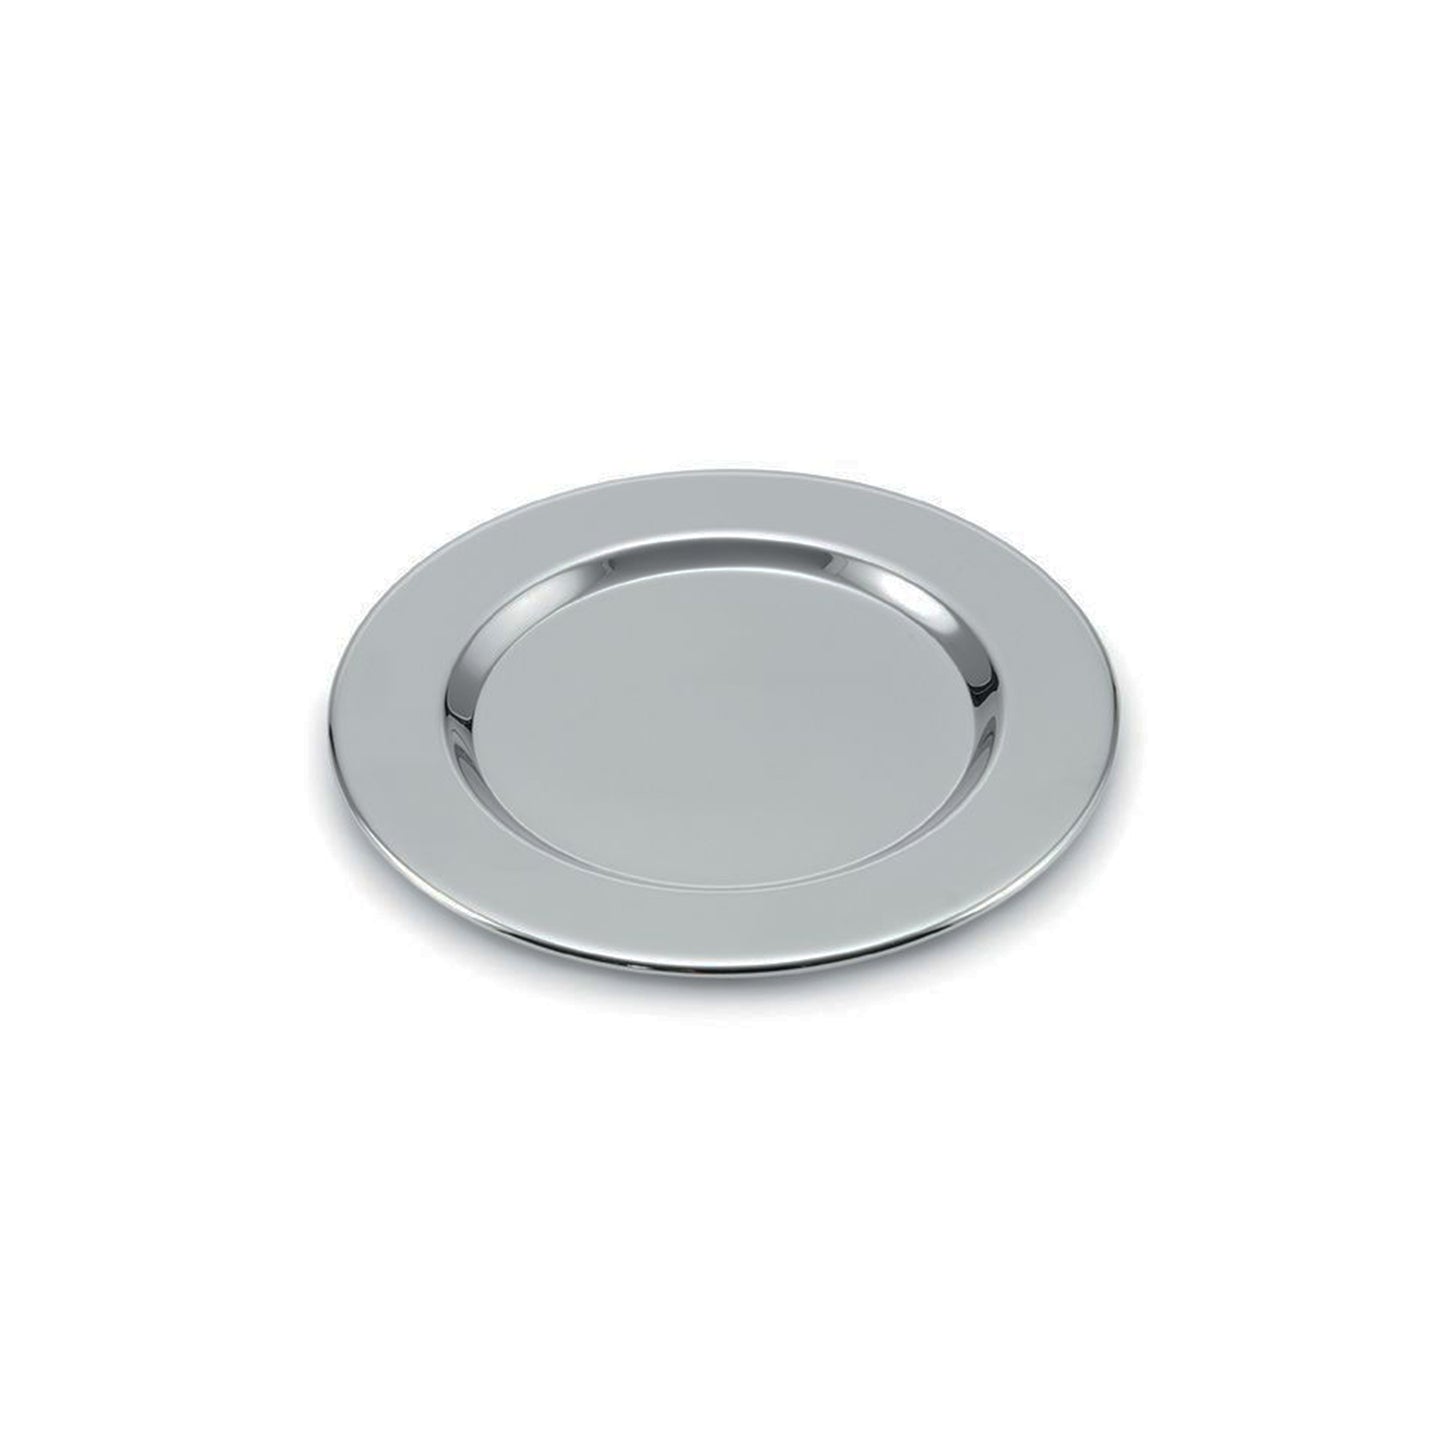 Silver Round Nickel-Plated Tray - 6"